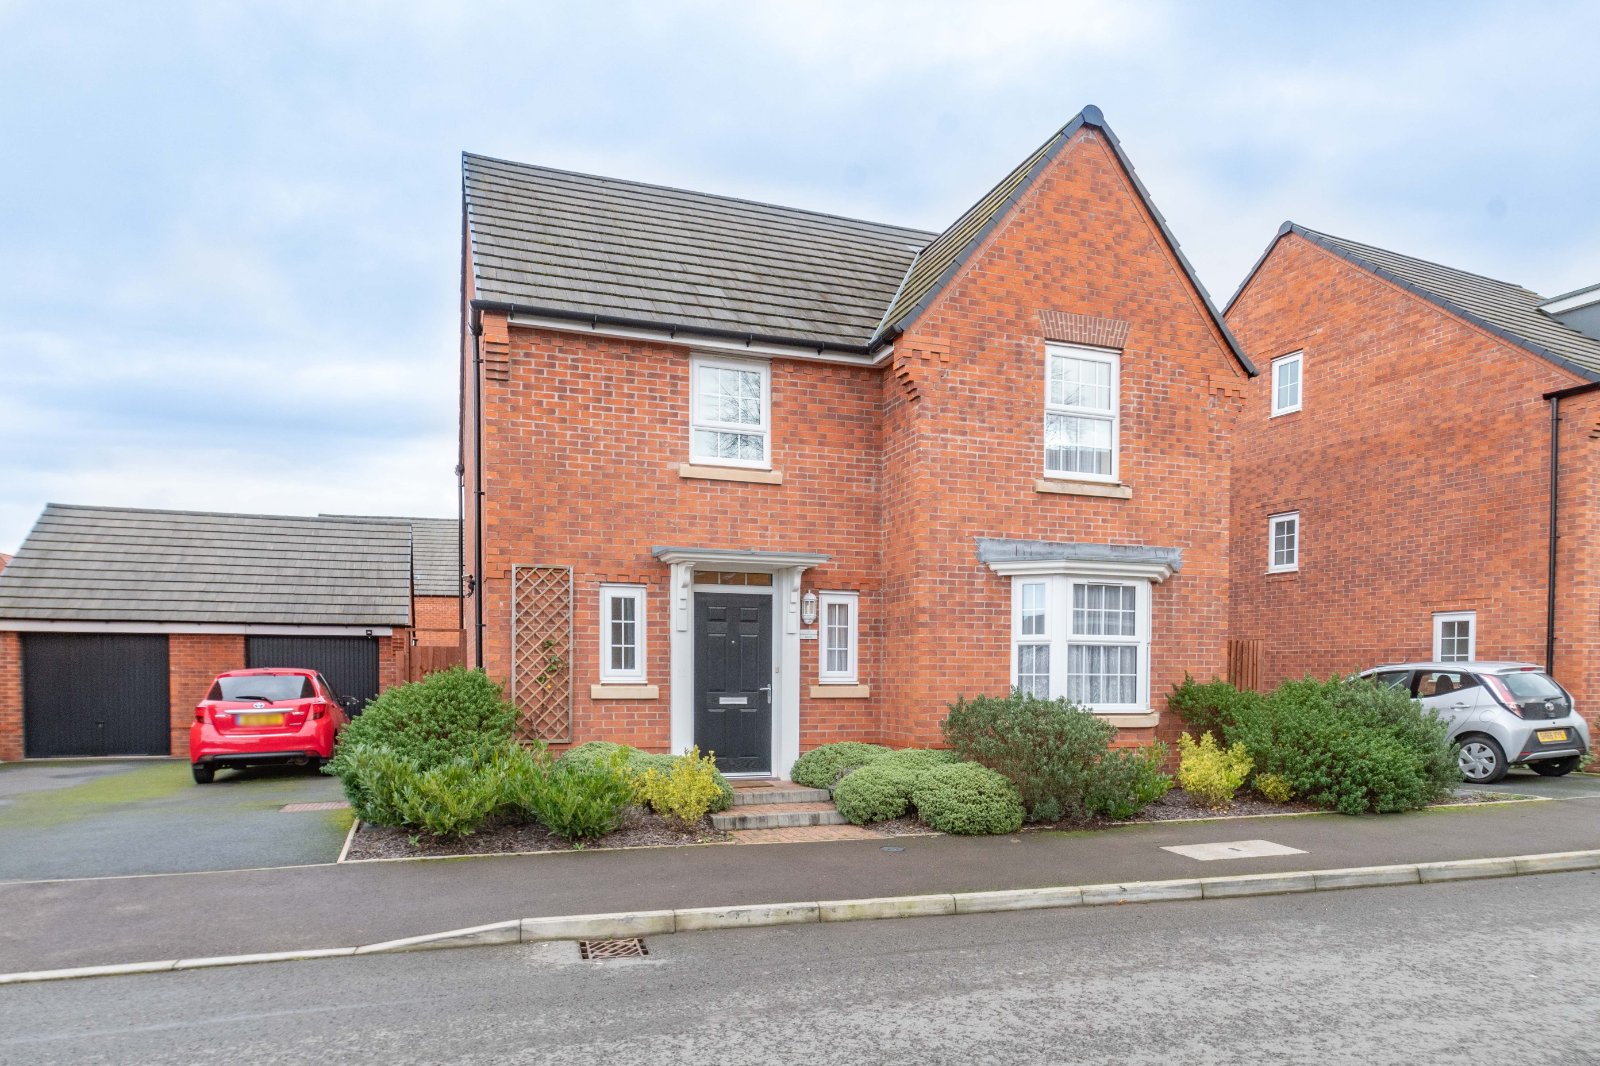 4 bed house for sale in Princethorpe Street, Bromsgrove  - Property Image 1